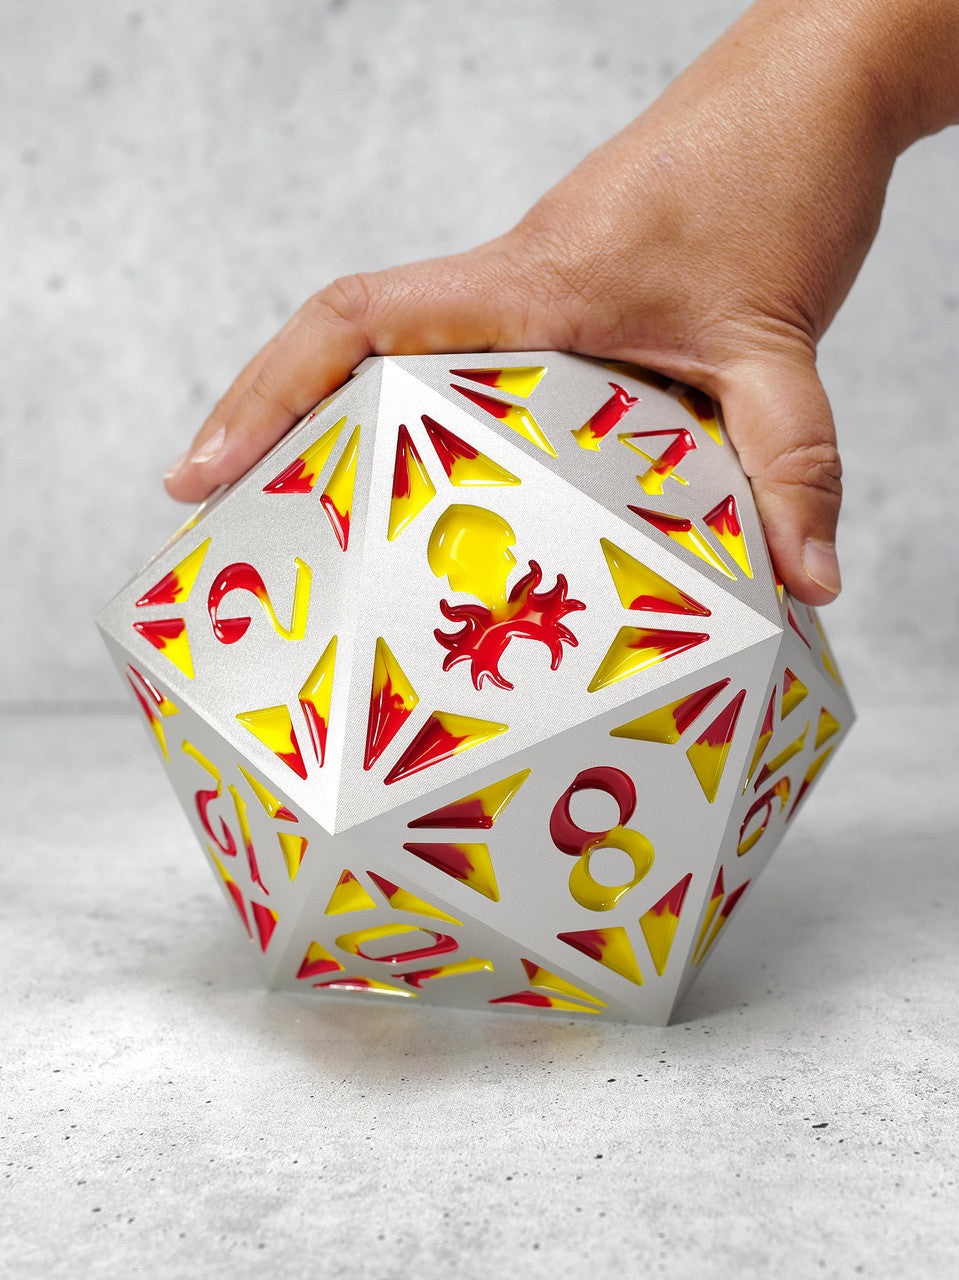 Leviathan Revival Solid Aluminum D20 inked in Red & Yellow